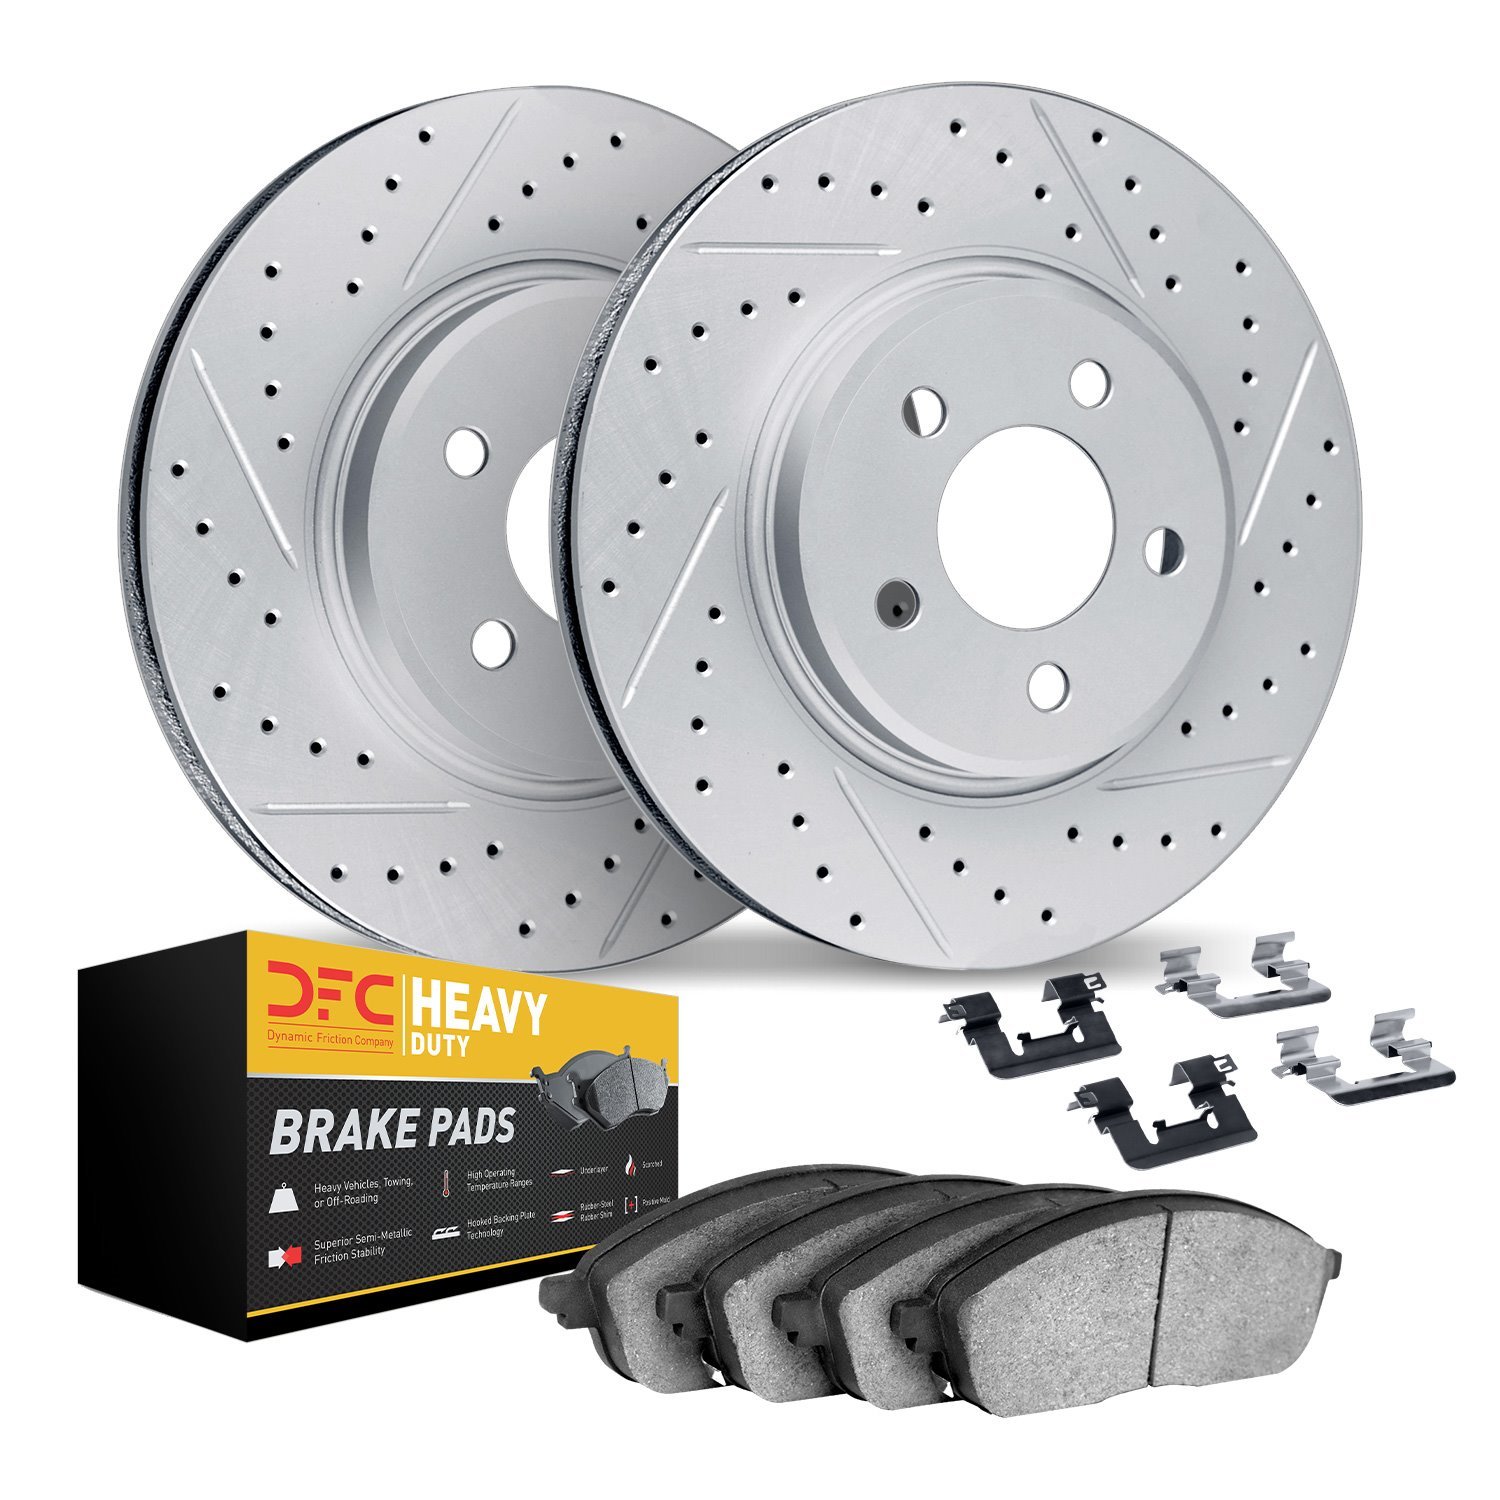 2212-99079 Geoperformance Drilled/Slotted Rotors w/Heavy-Duty Pads Kit & Hardware, 1994-2003 Ford/Lincoln/Mercury/Mazda, Positio